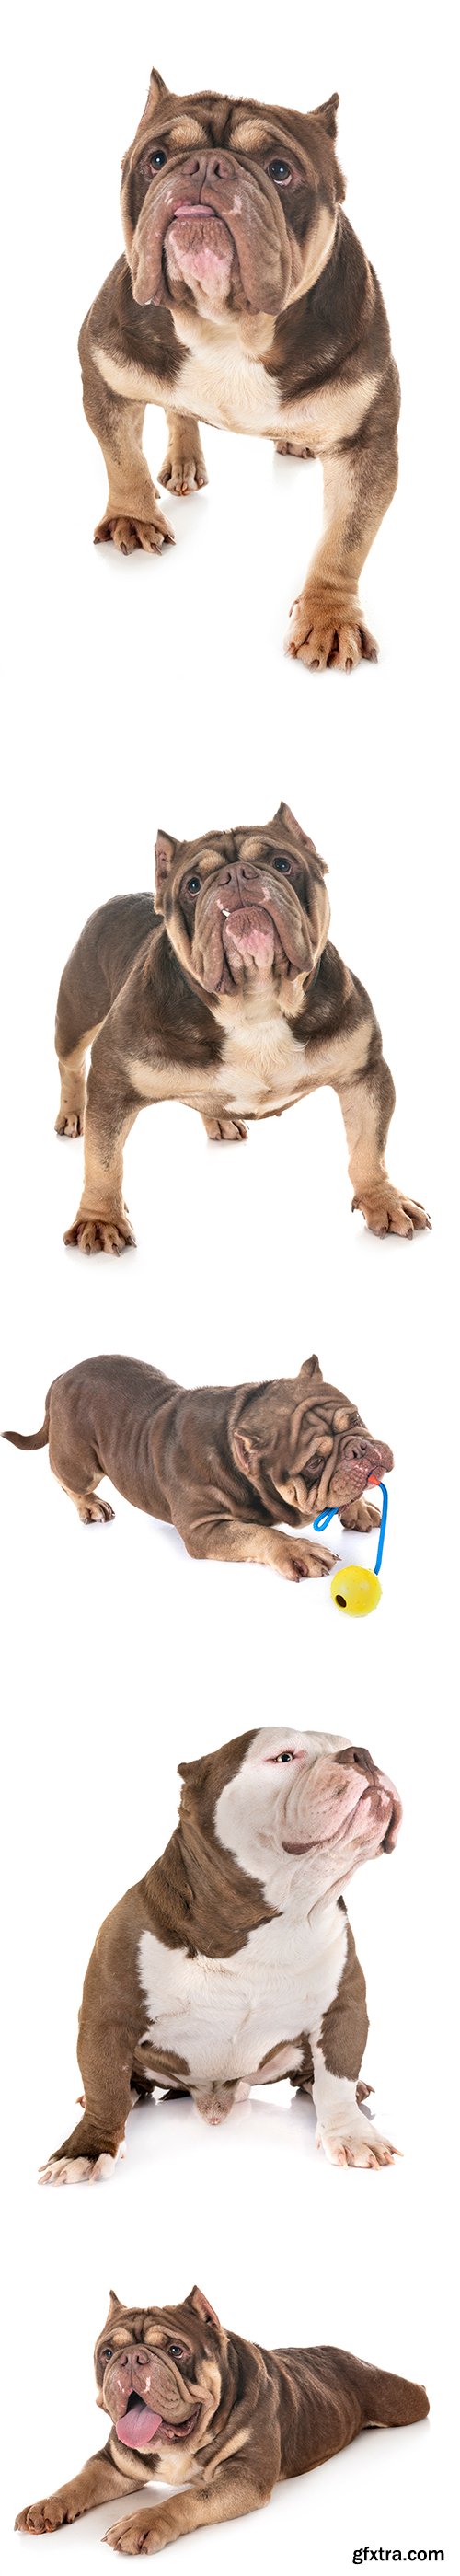 American Bully Isolated - 10xJPGs